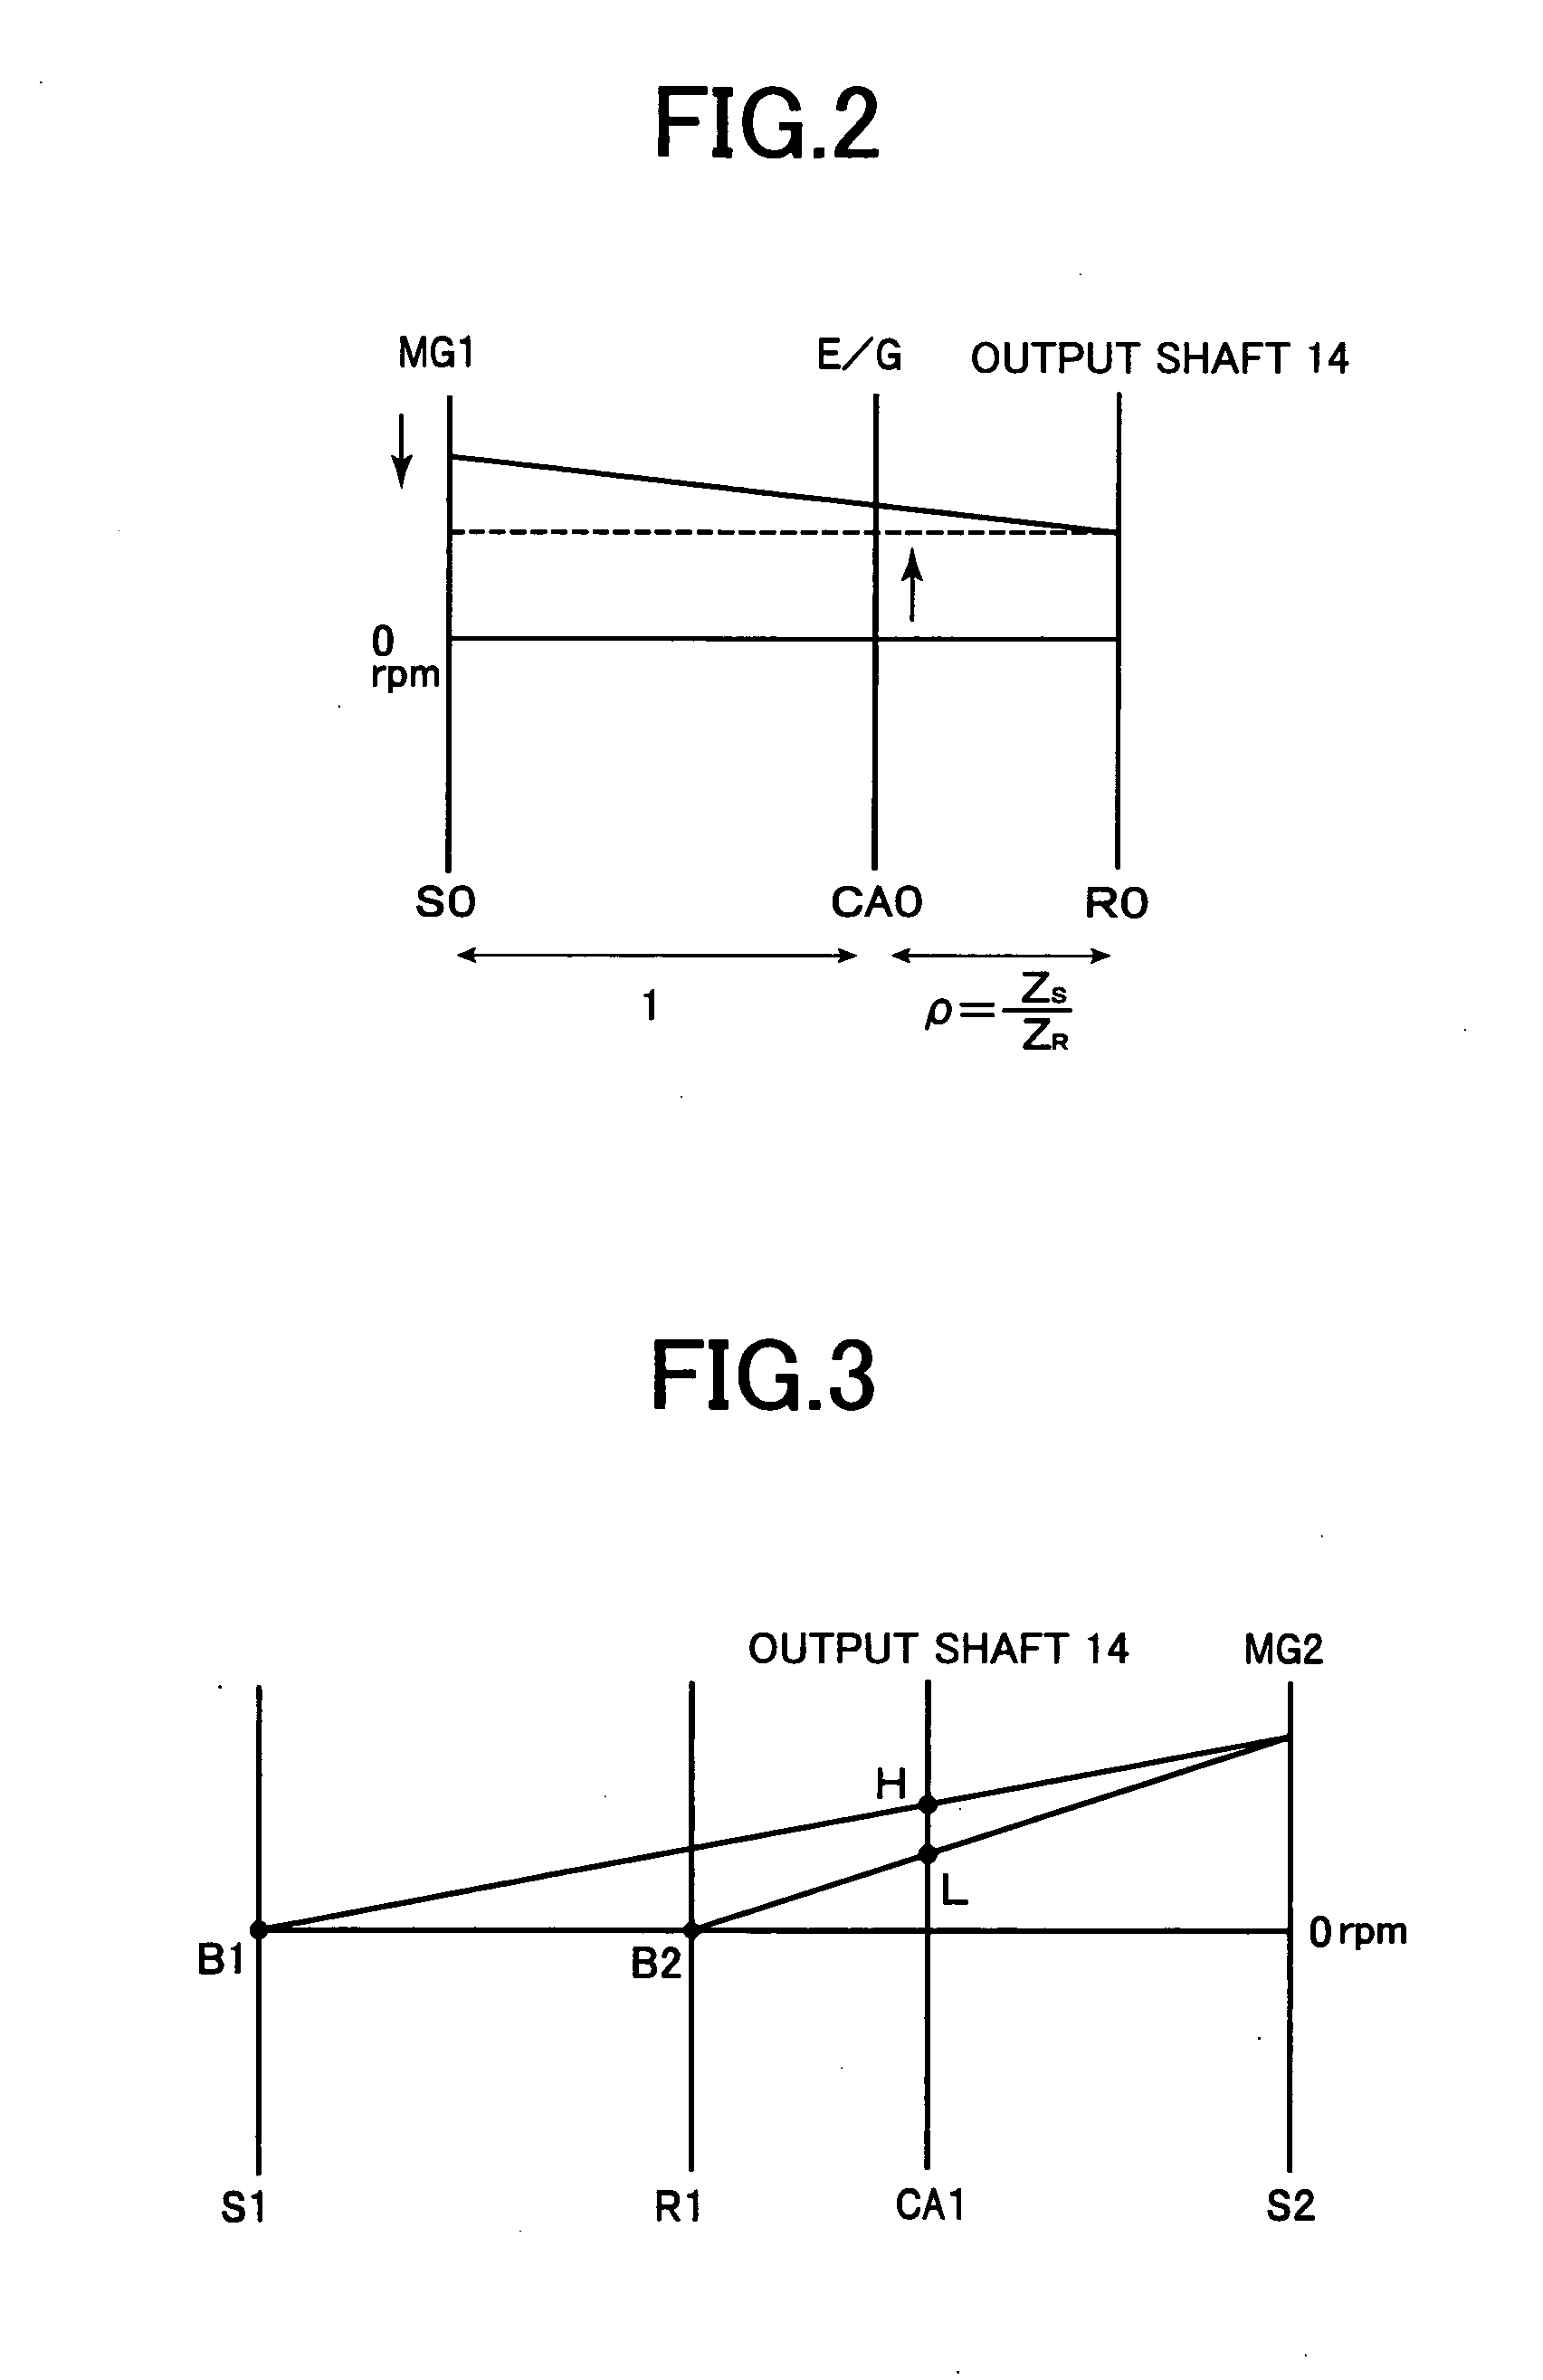 Control device for vehicular power transmitting apparatus